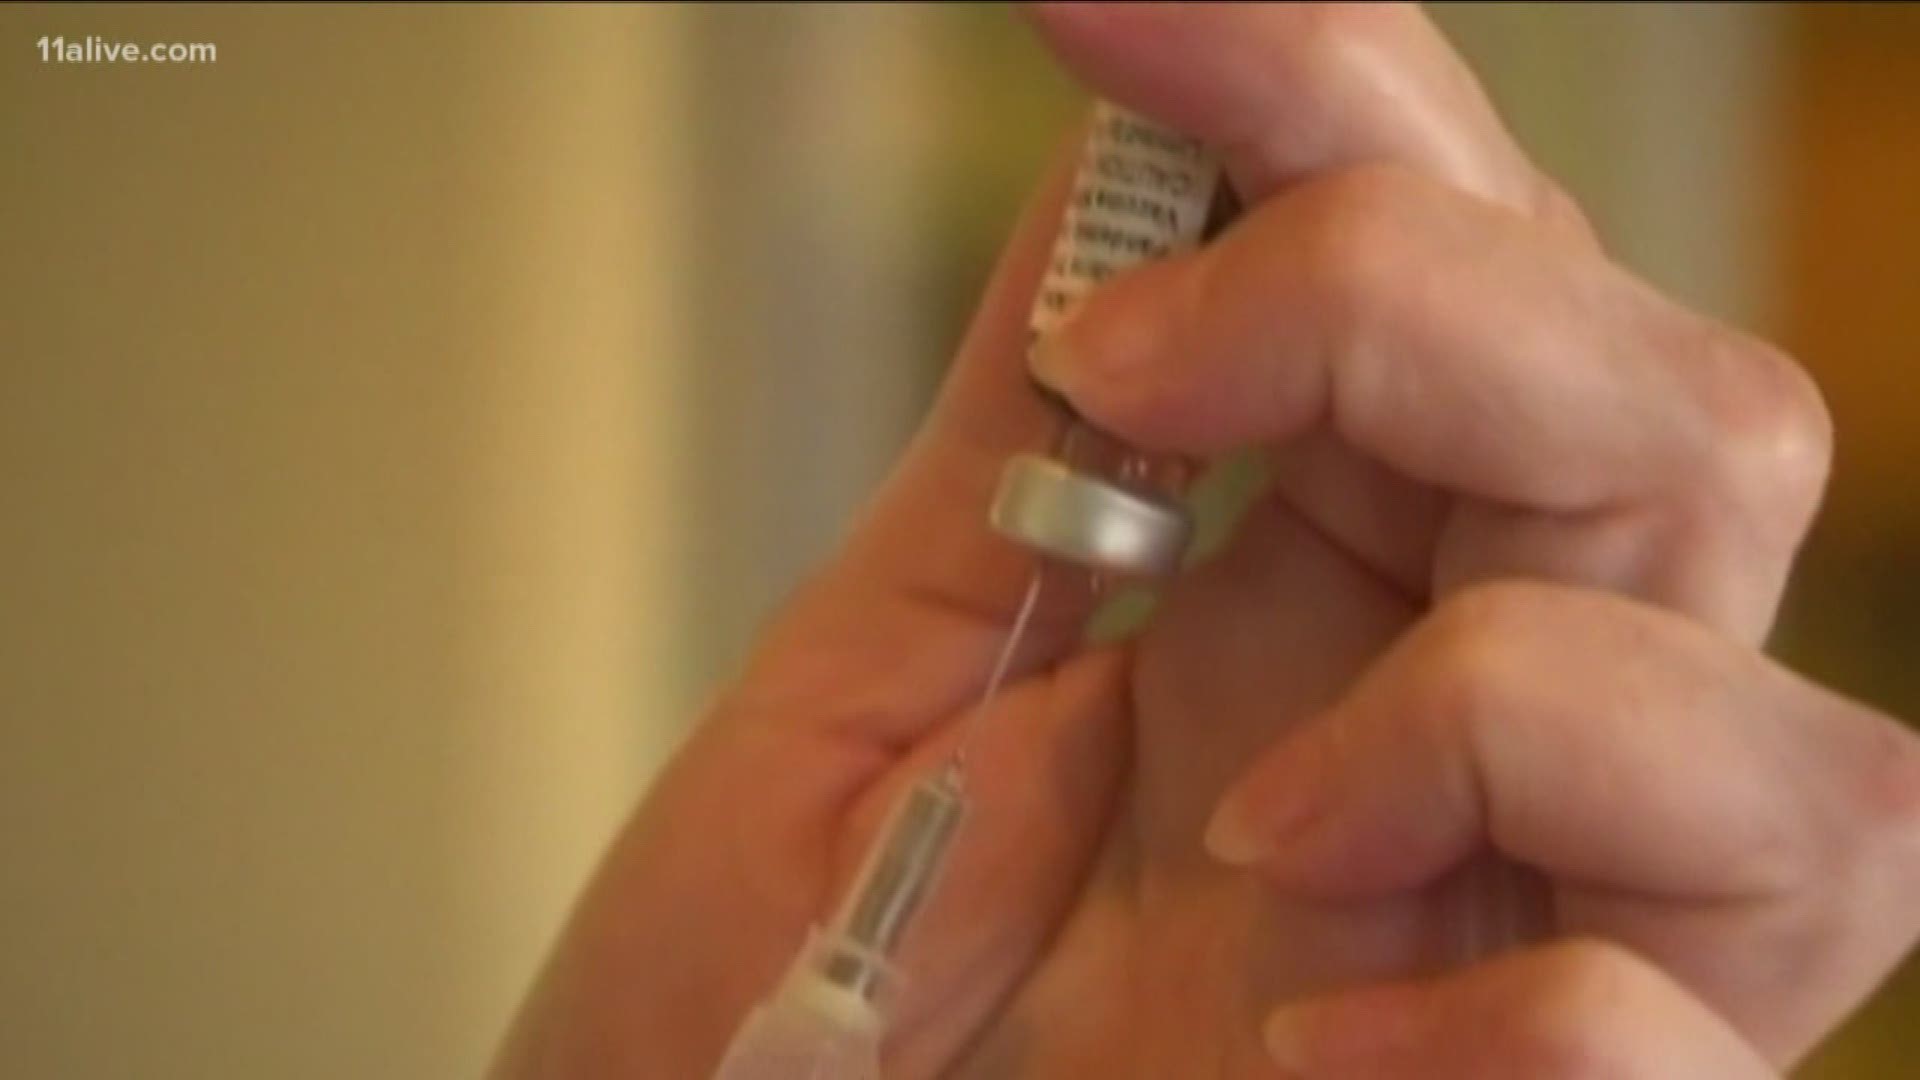 There are now five known flu deaths in the state of Georgia this season,